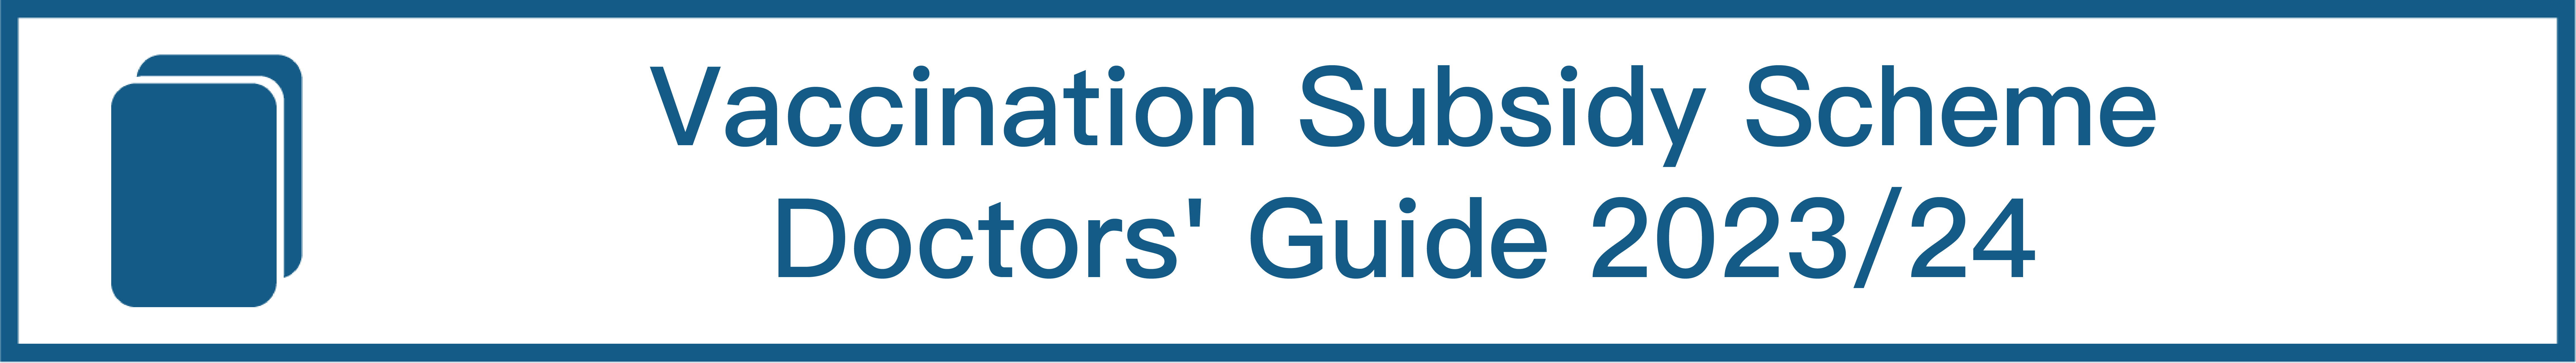 Vaccination Subsidy Scheme Doctors' Guide 2023/24